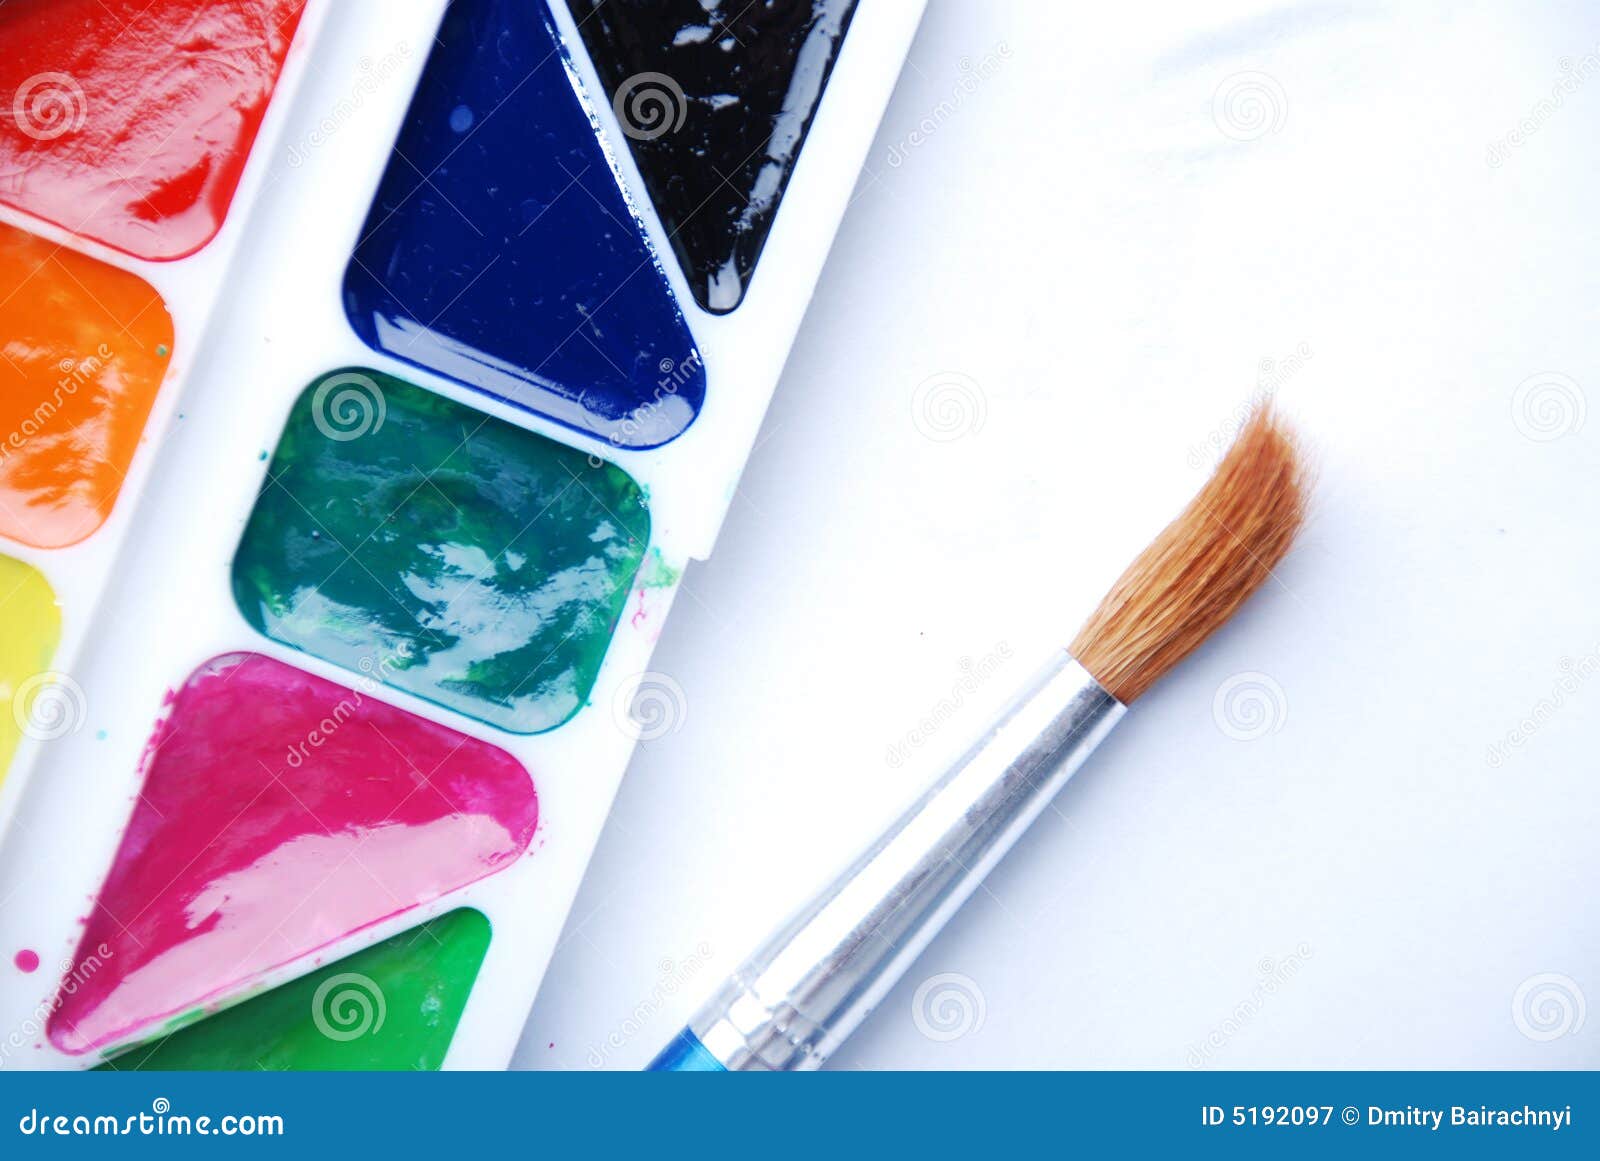 Colors paints stock image. Image of green, colors, assorted - 5192097